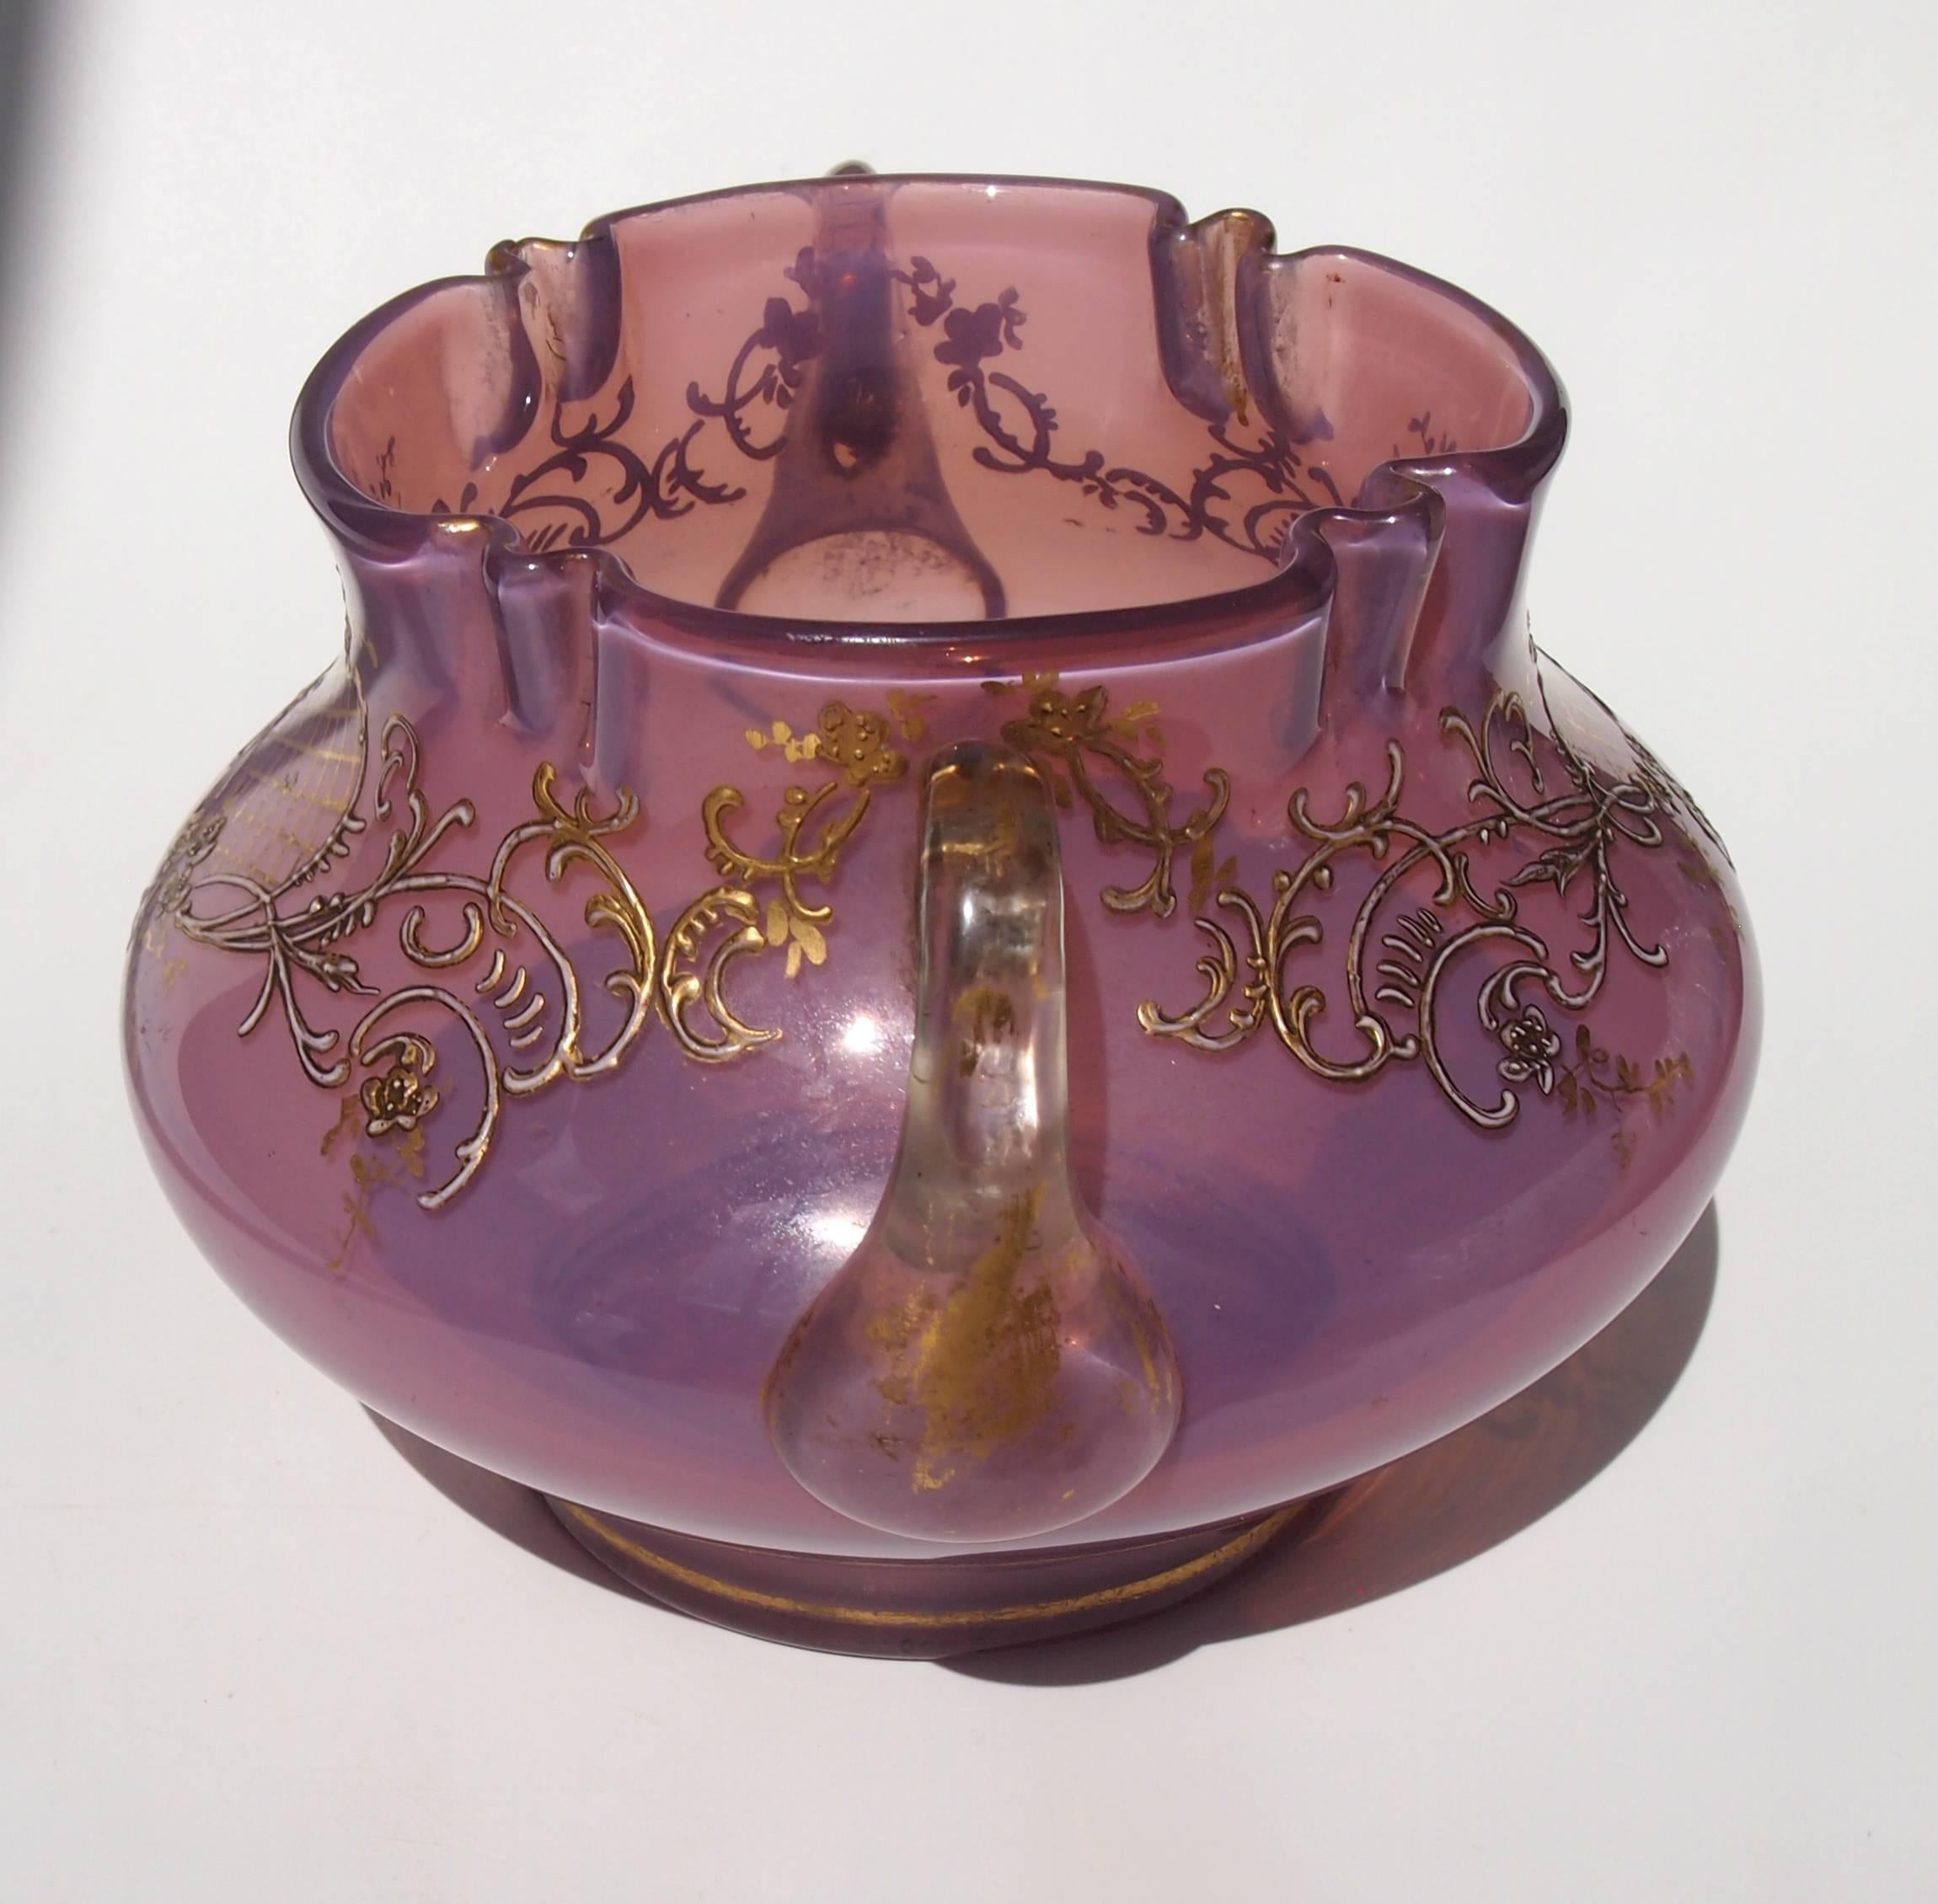 Stunning two handled vibrant pink (Heliotrope) early Loetz vase (Series I PN 500), This is a very early Loetz decoration - it is gilded and enameled with one of the Classic French Rococo patterns.